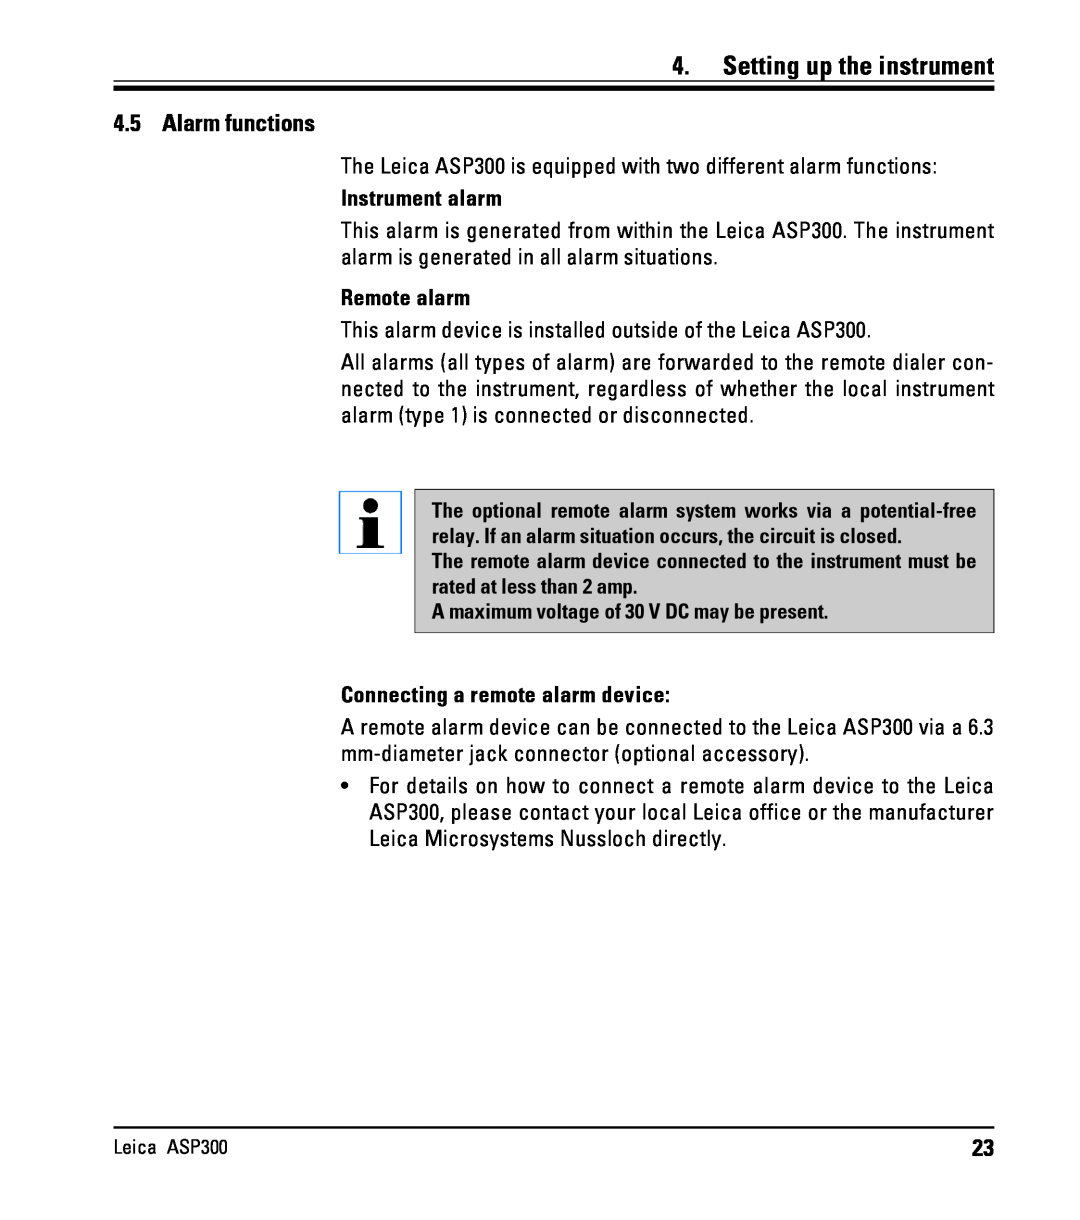 Leica ASP300 instruction manual Alarm functions, Setting up the instrument 